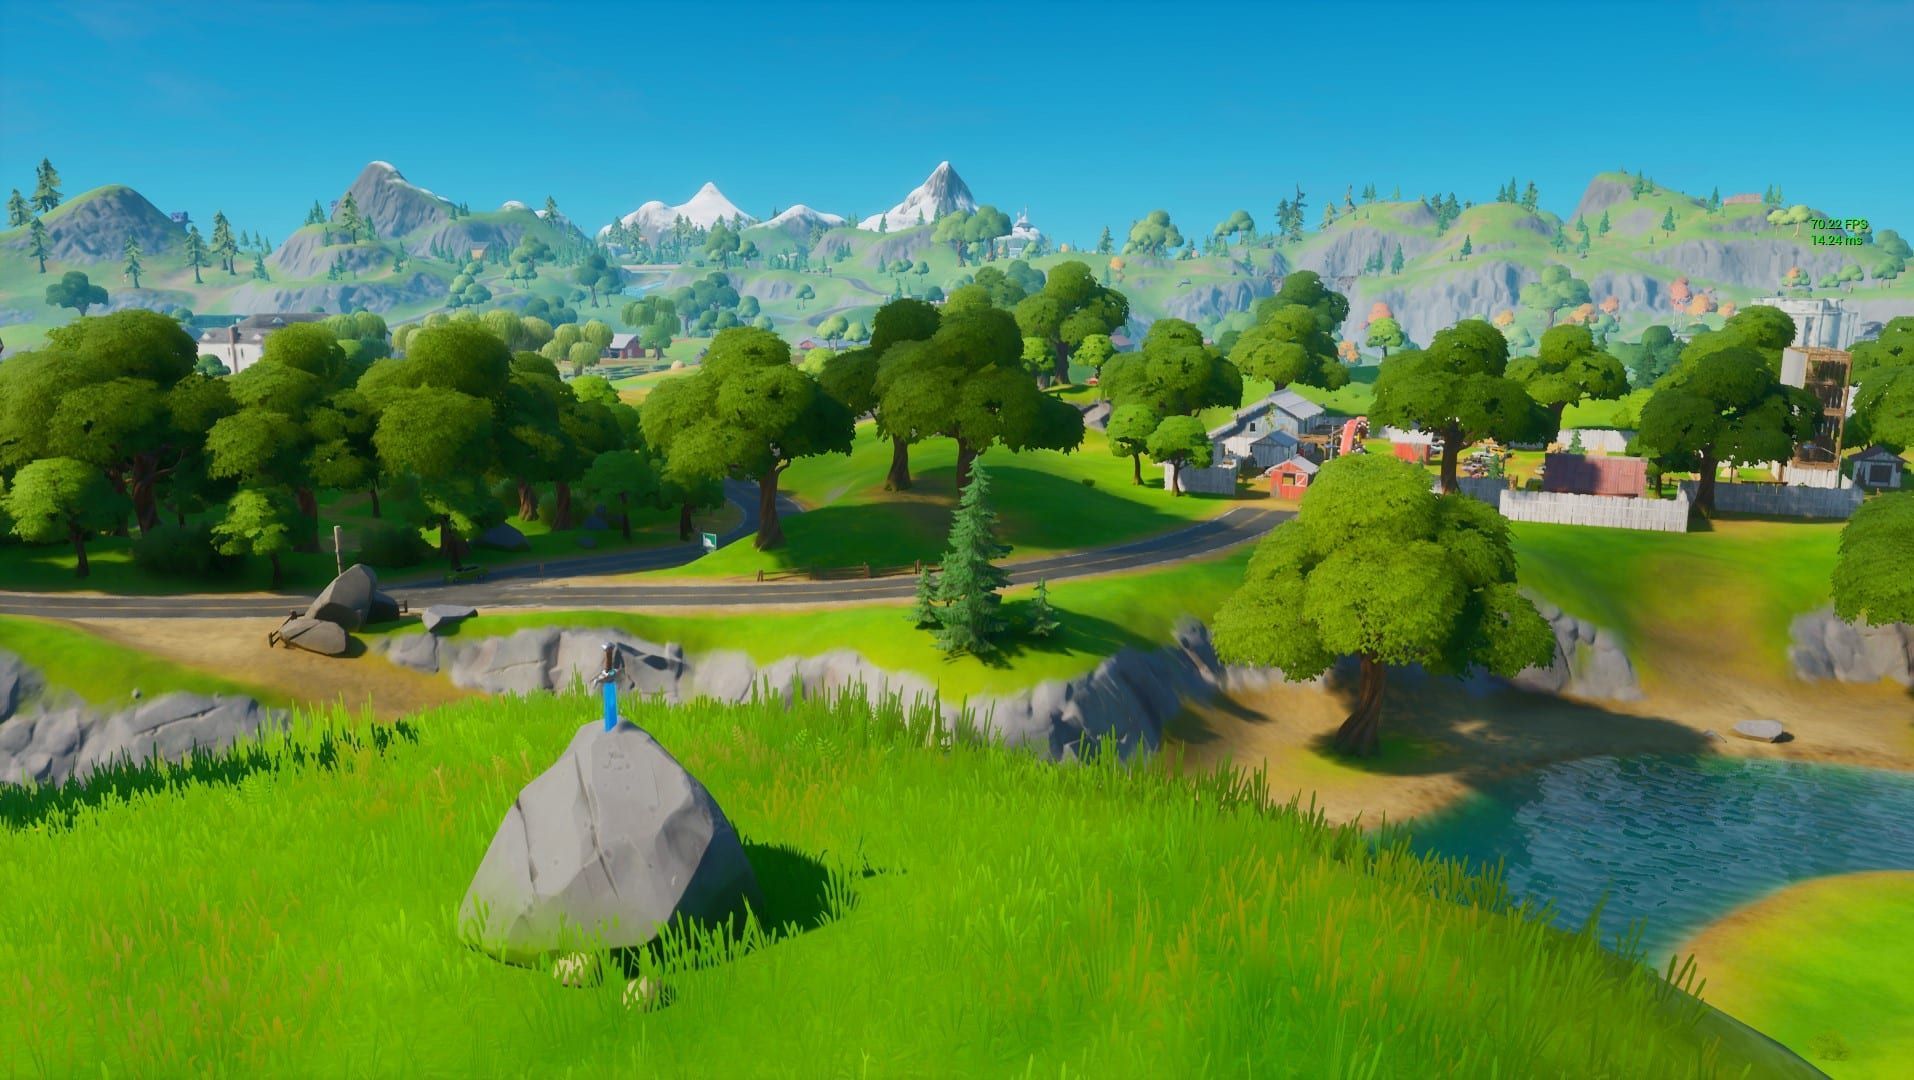 Fortnite: Where to find Skye's Sword in a Stone in High Places. Background landscape, Fortnite background, Fortnite